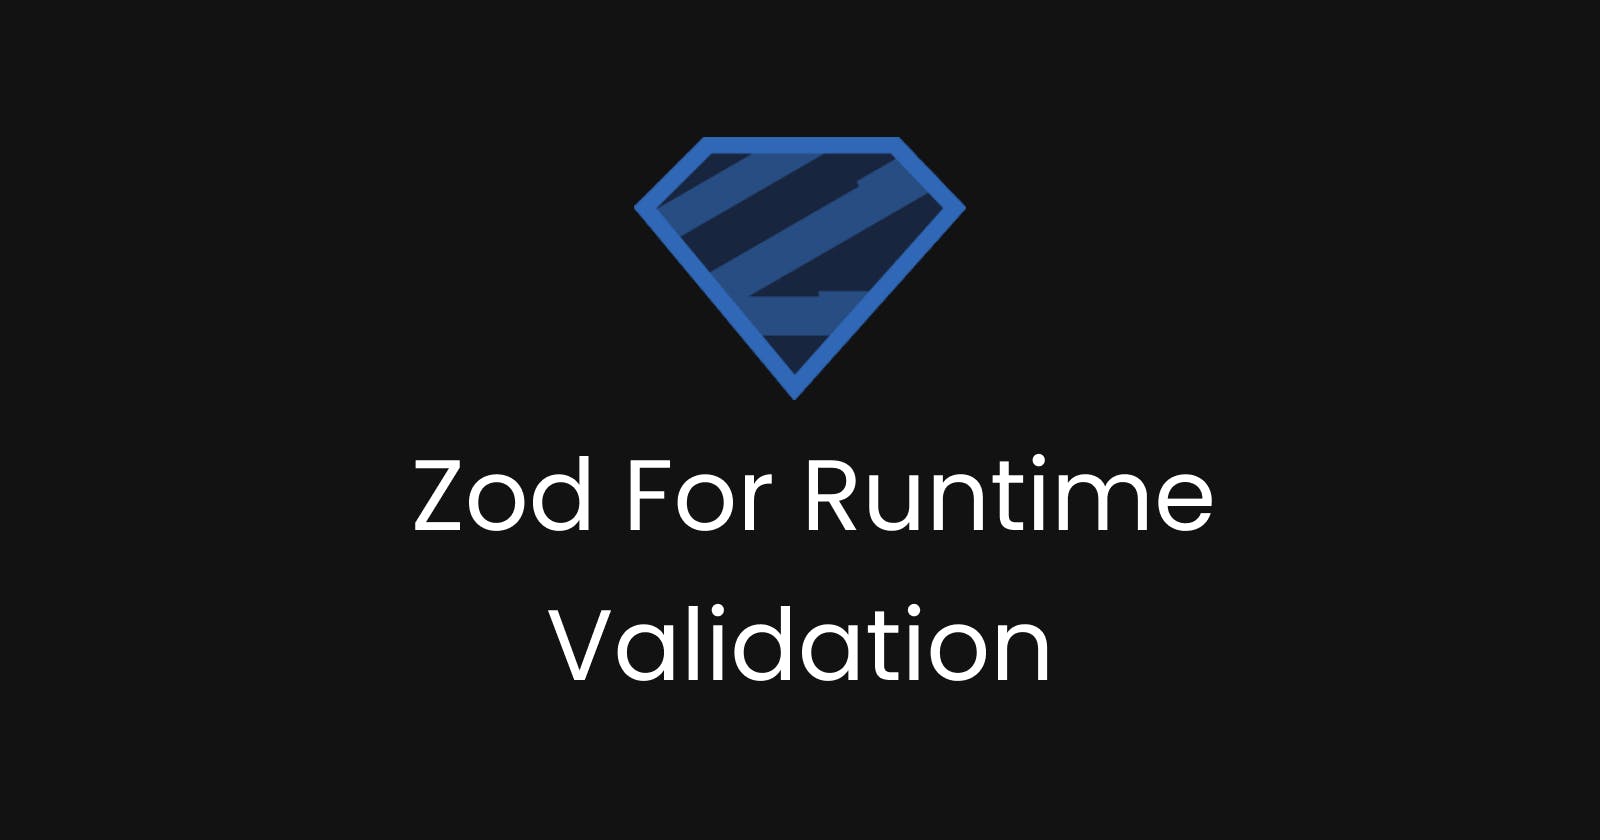 Zod for Runtime Validation in Next.js